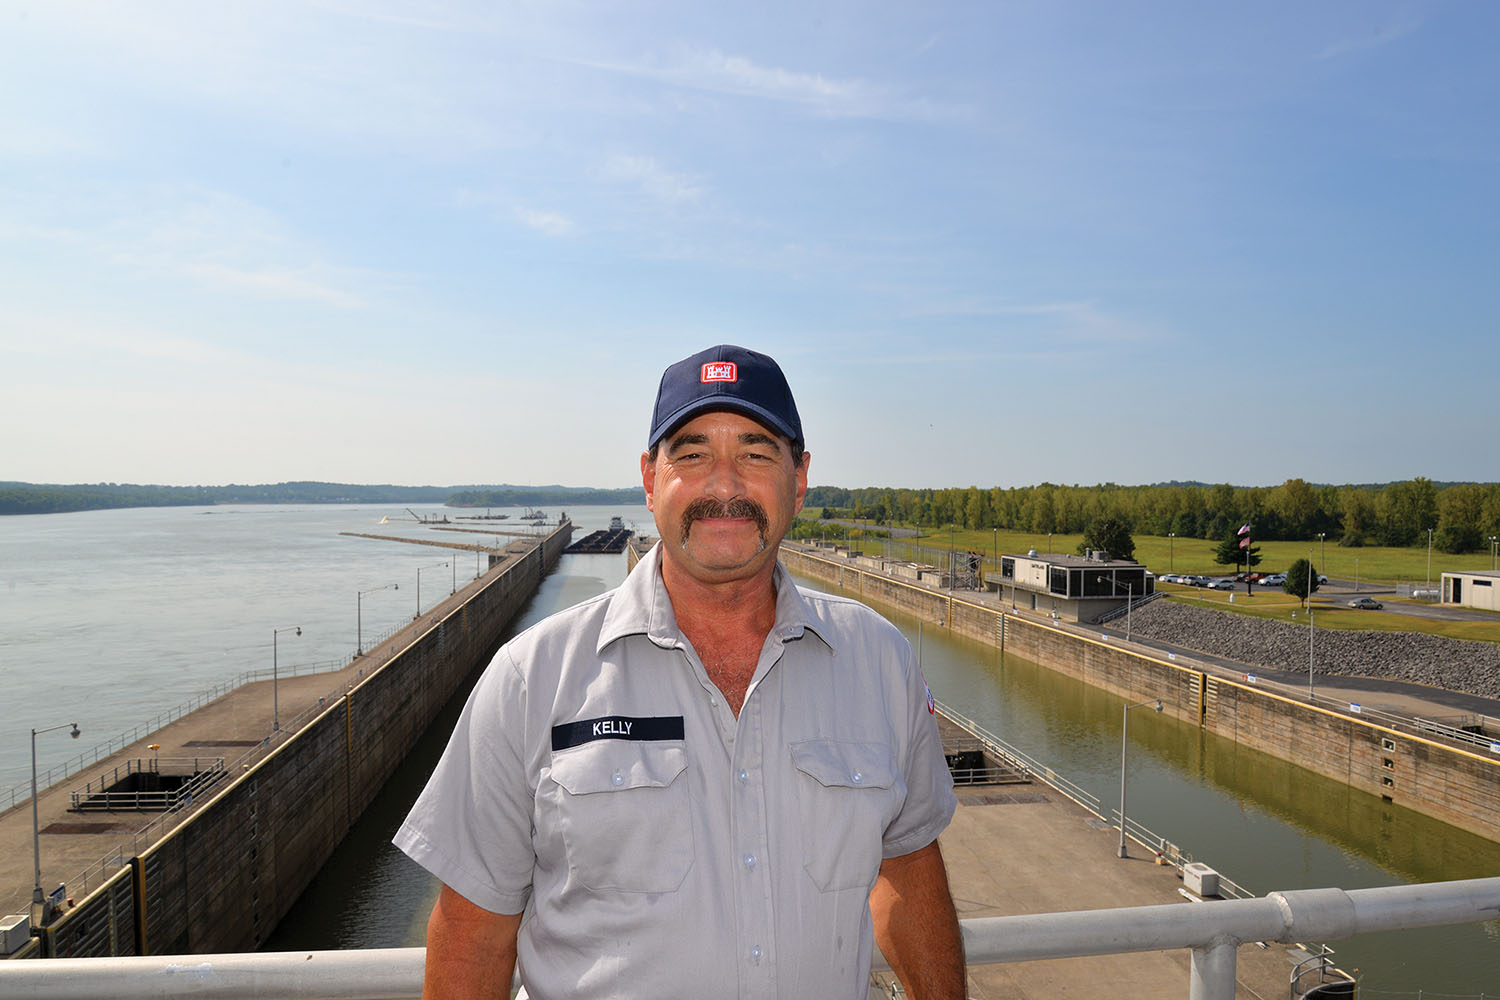 Lockmaster Jeff Kelly stands on top of Smithland Dam. His father, Wayne, was the first lockmaster there. His grandfather, uncle, first cousin and nephew also have made careers working for the Corps at locks and dams. (Photo courtesy of Louisville Engineer District)